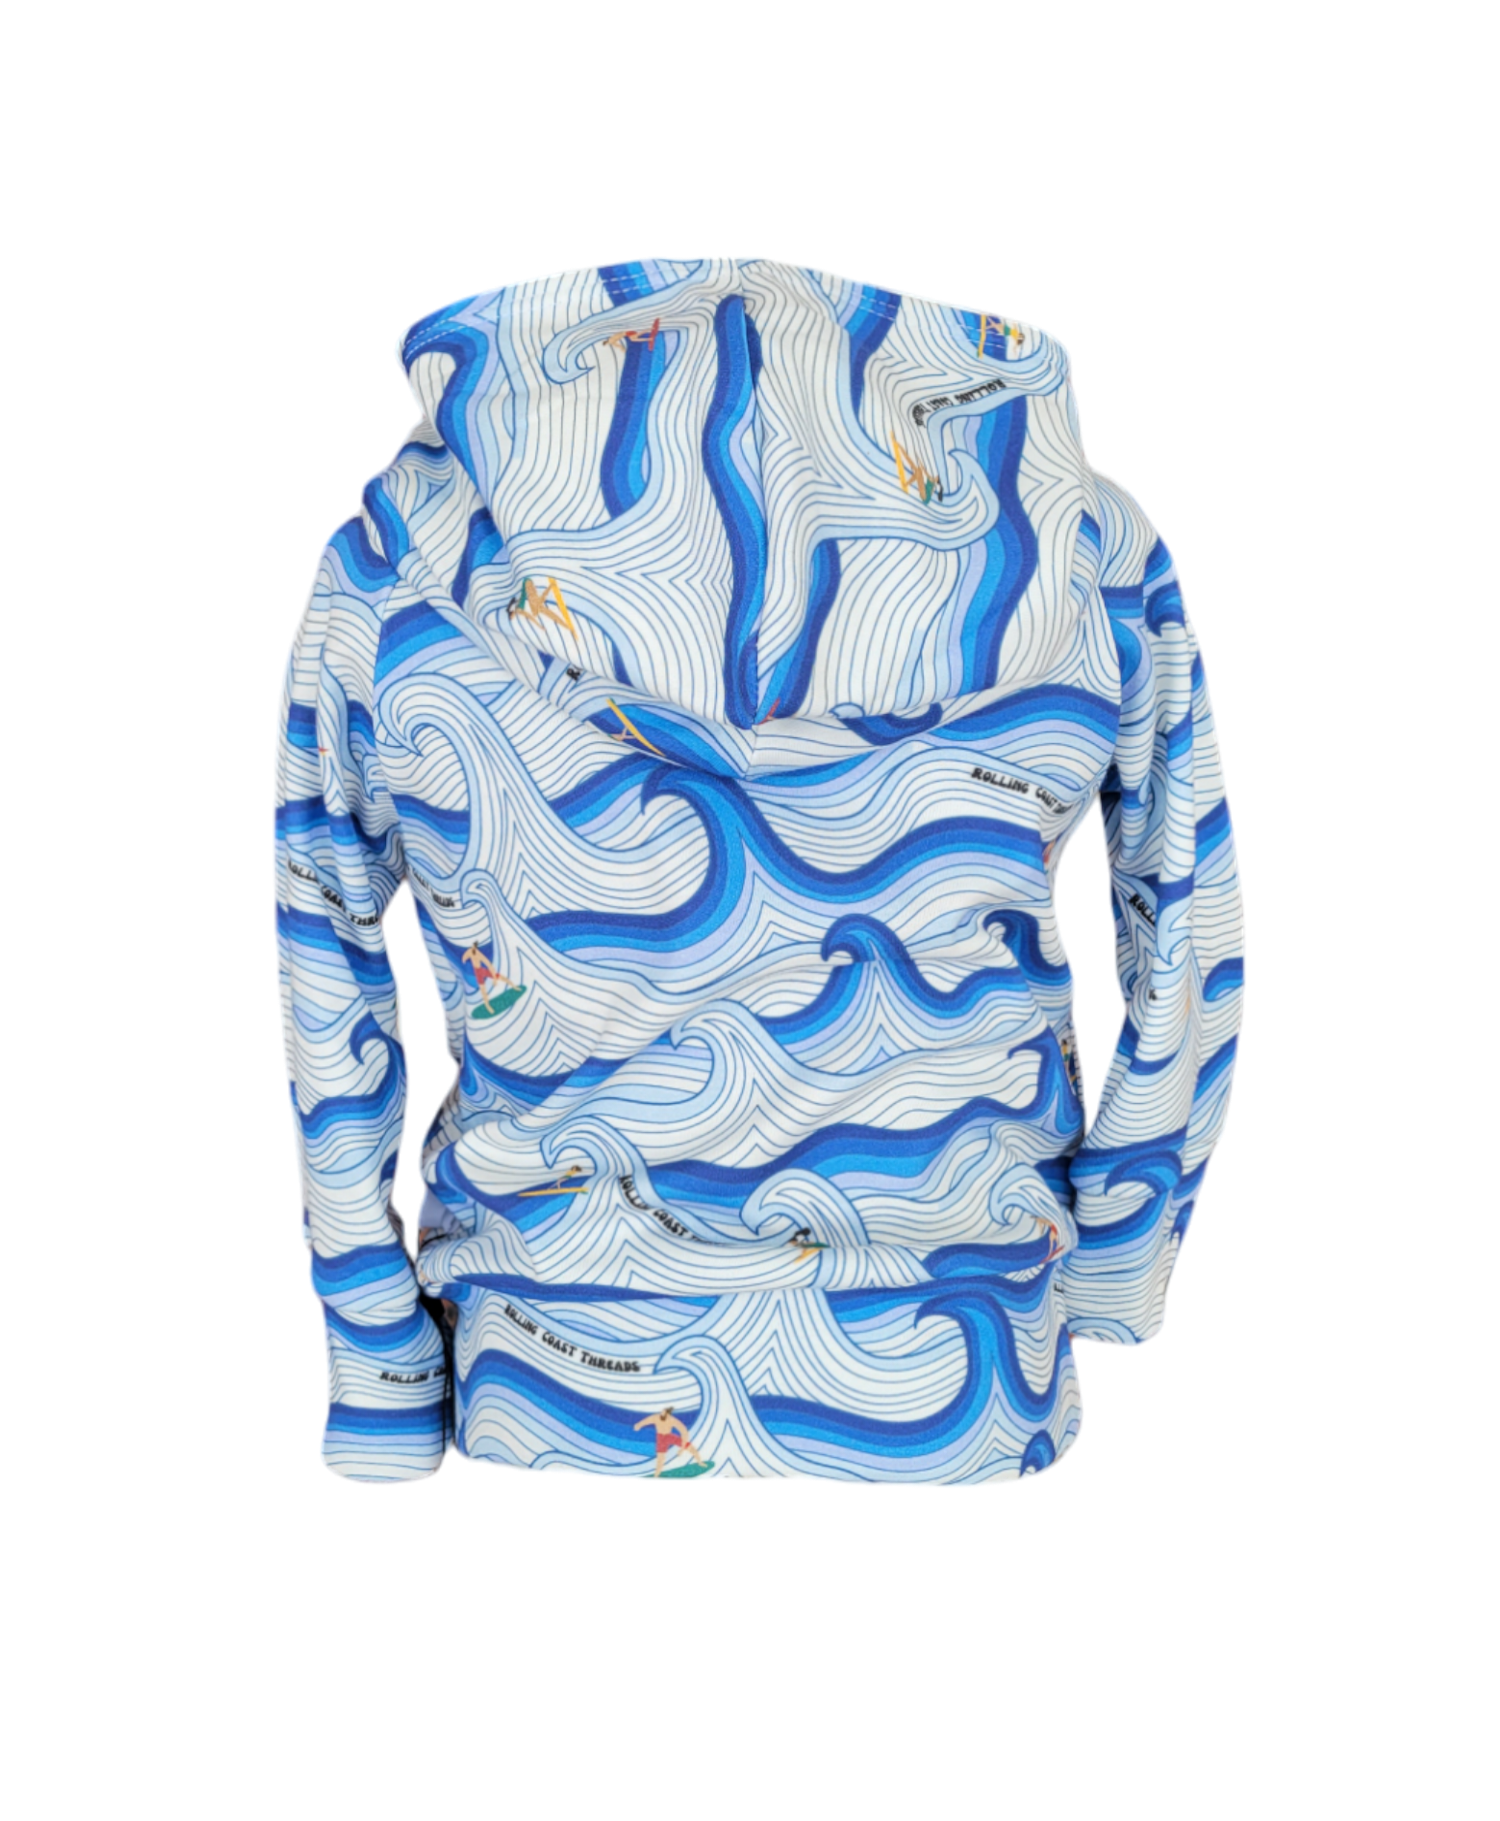 Back of Surf Hoodie. Organic hoodie with surfers riding white and blue waves.